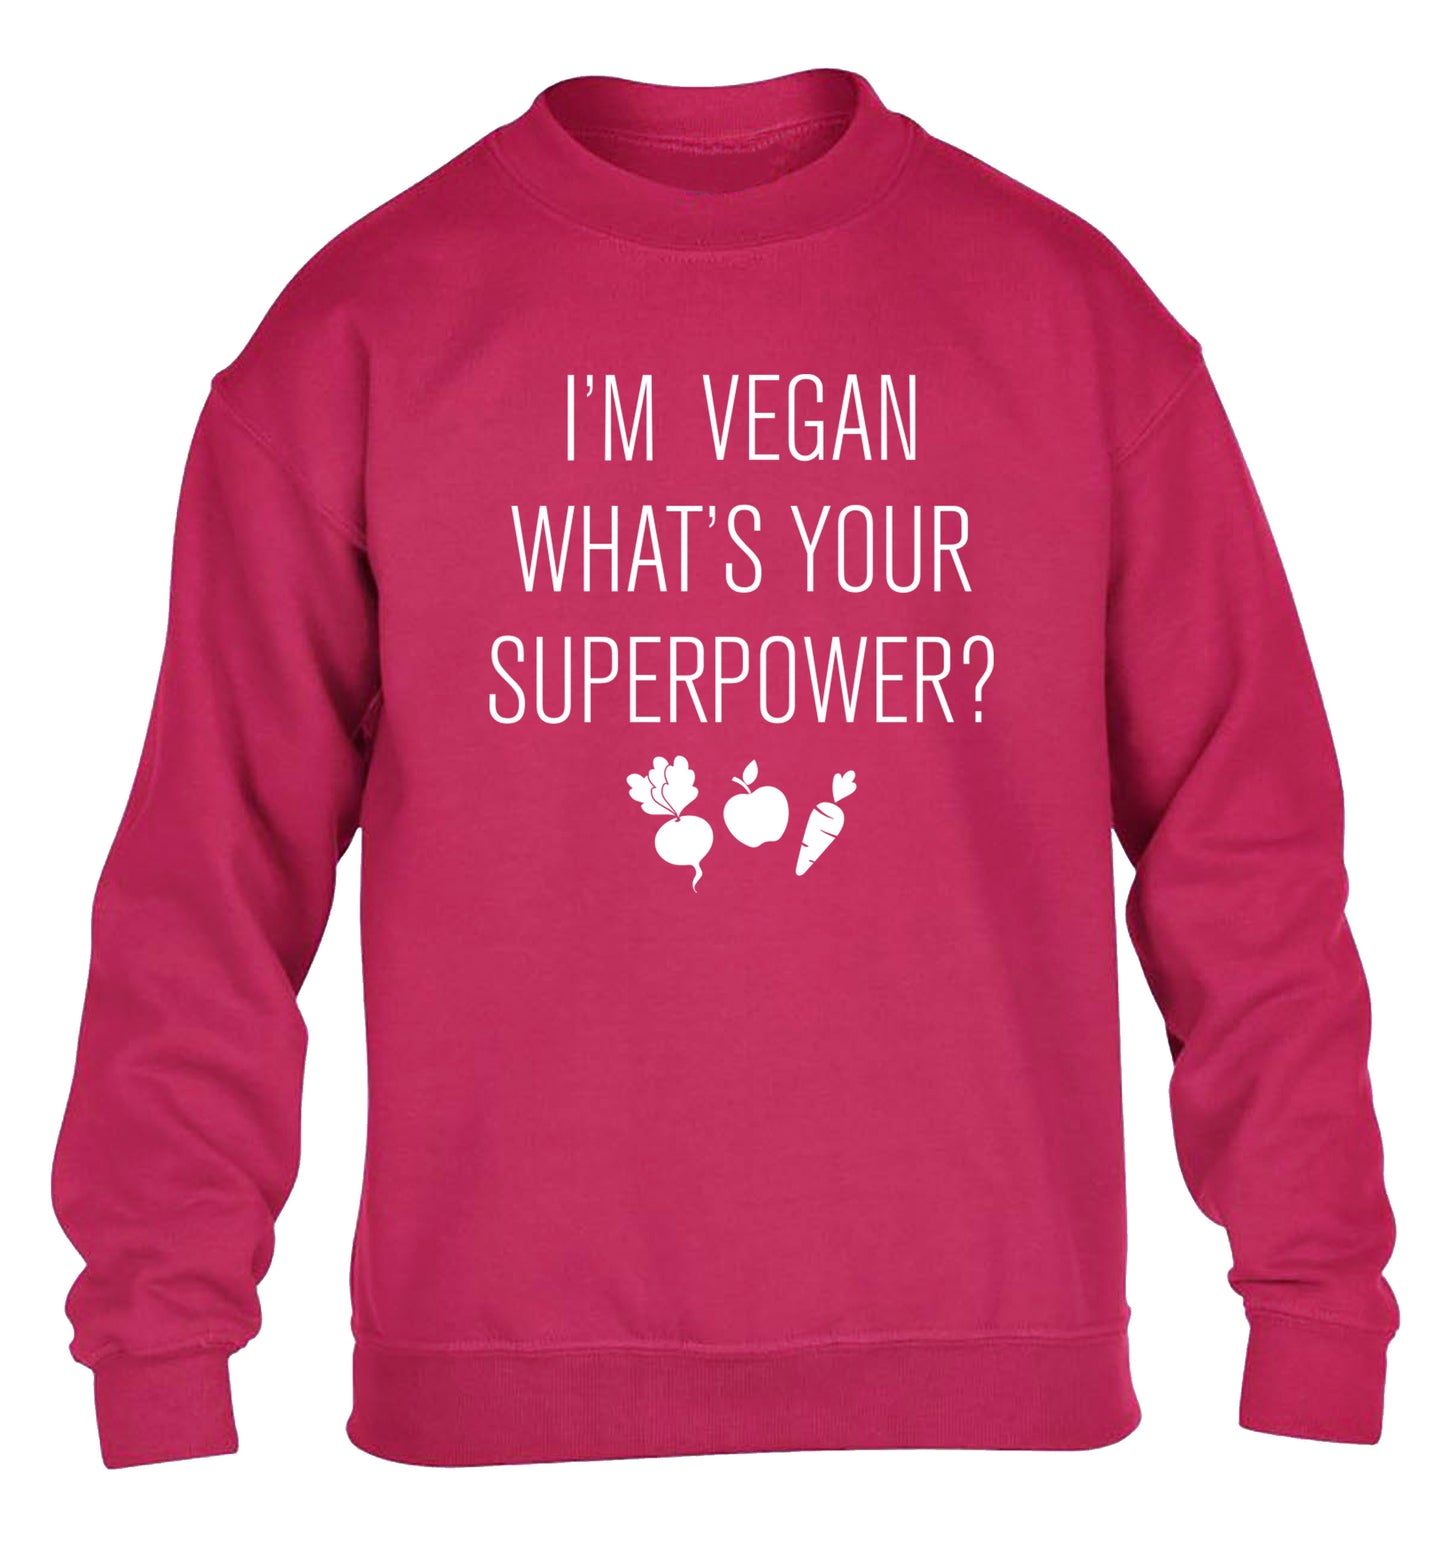 I'm Vegan What's Your Superpower? children's pink sweater 12-13 Years